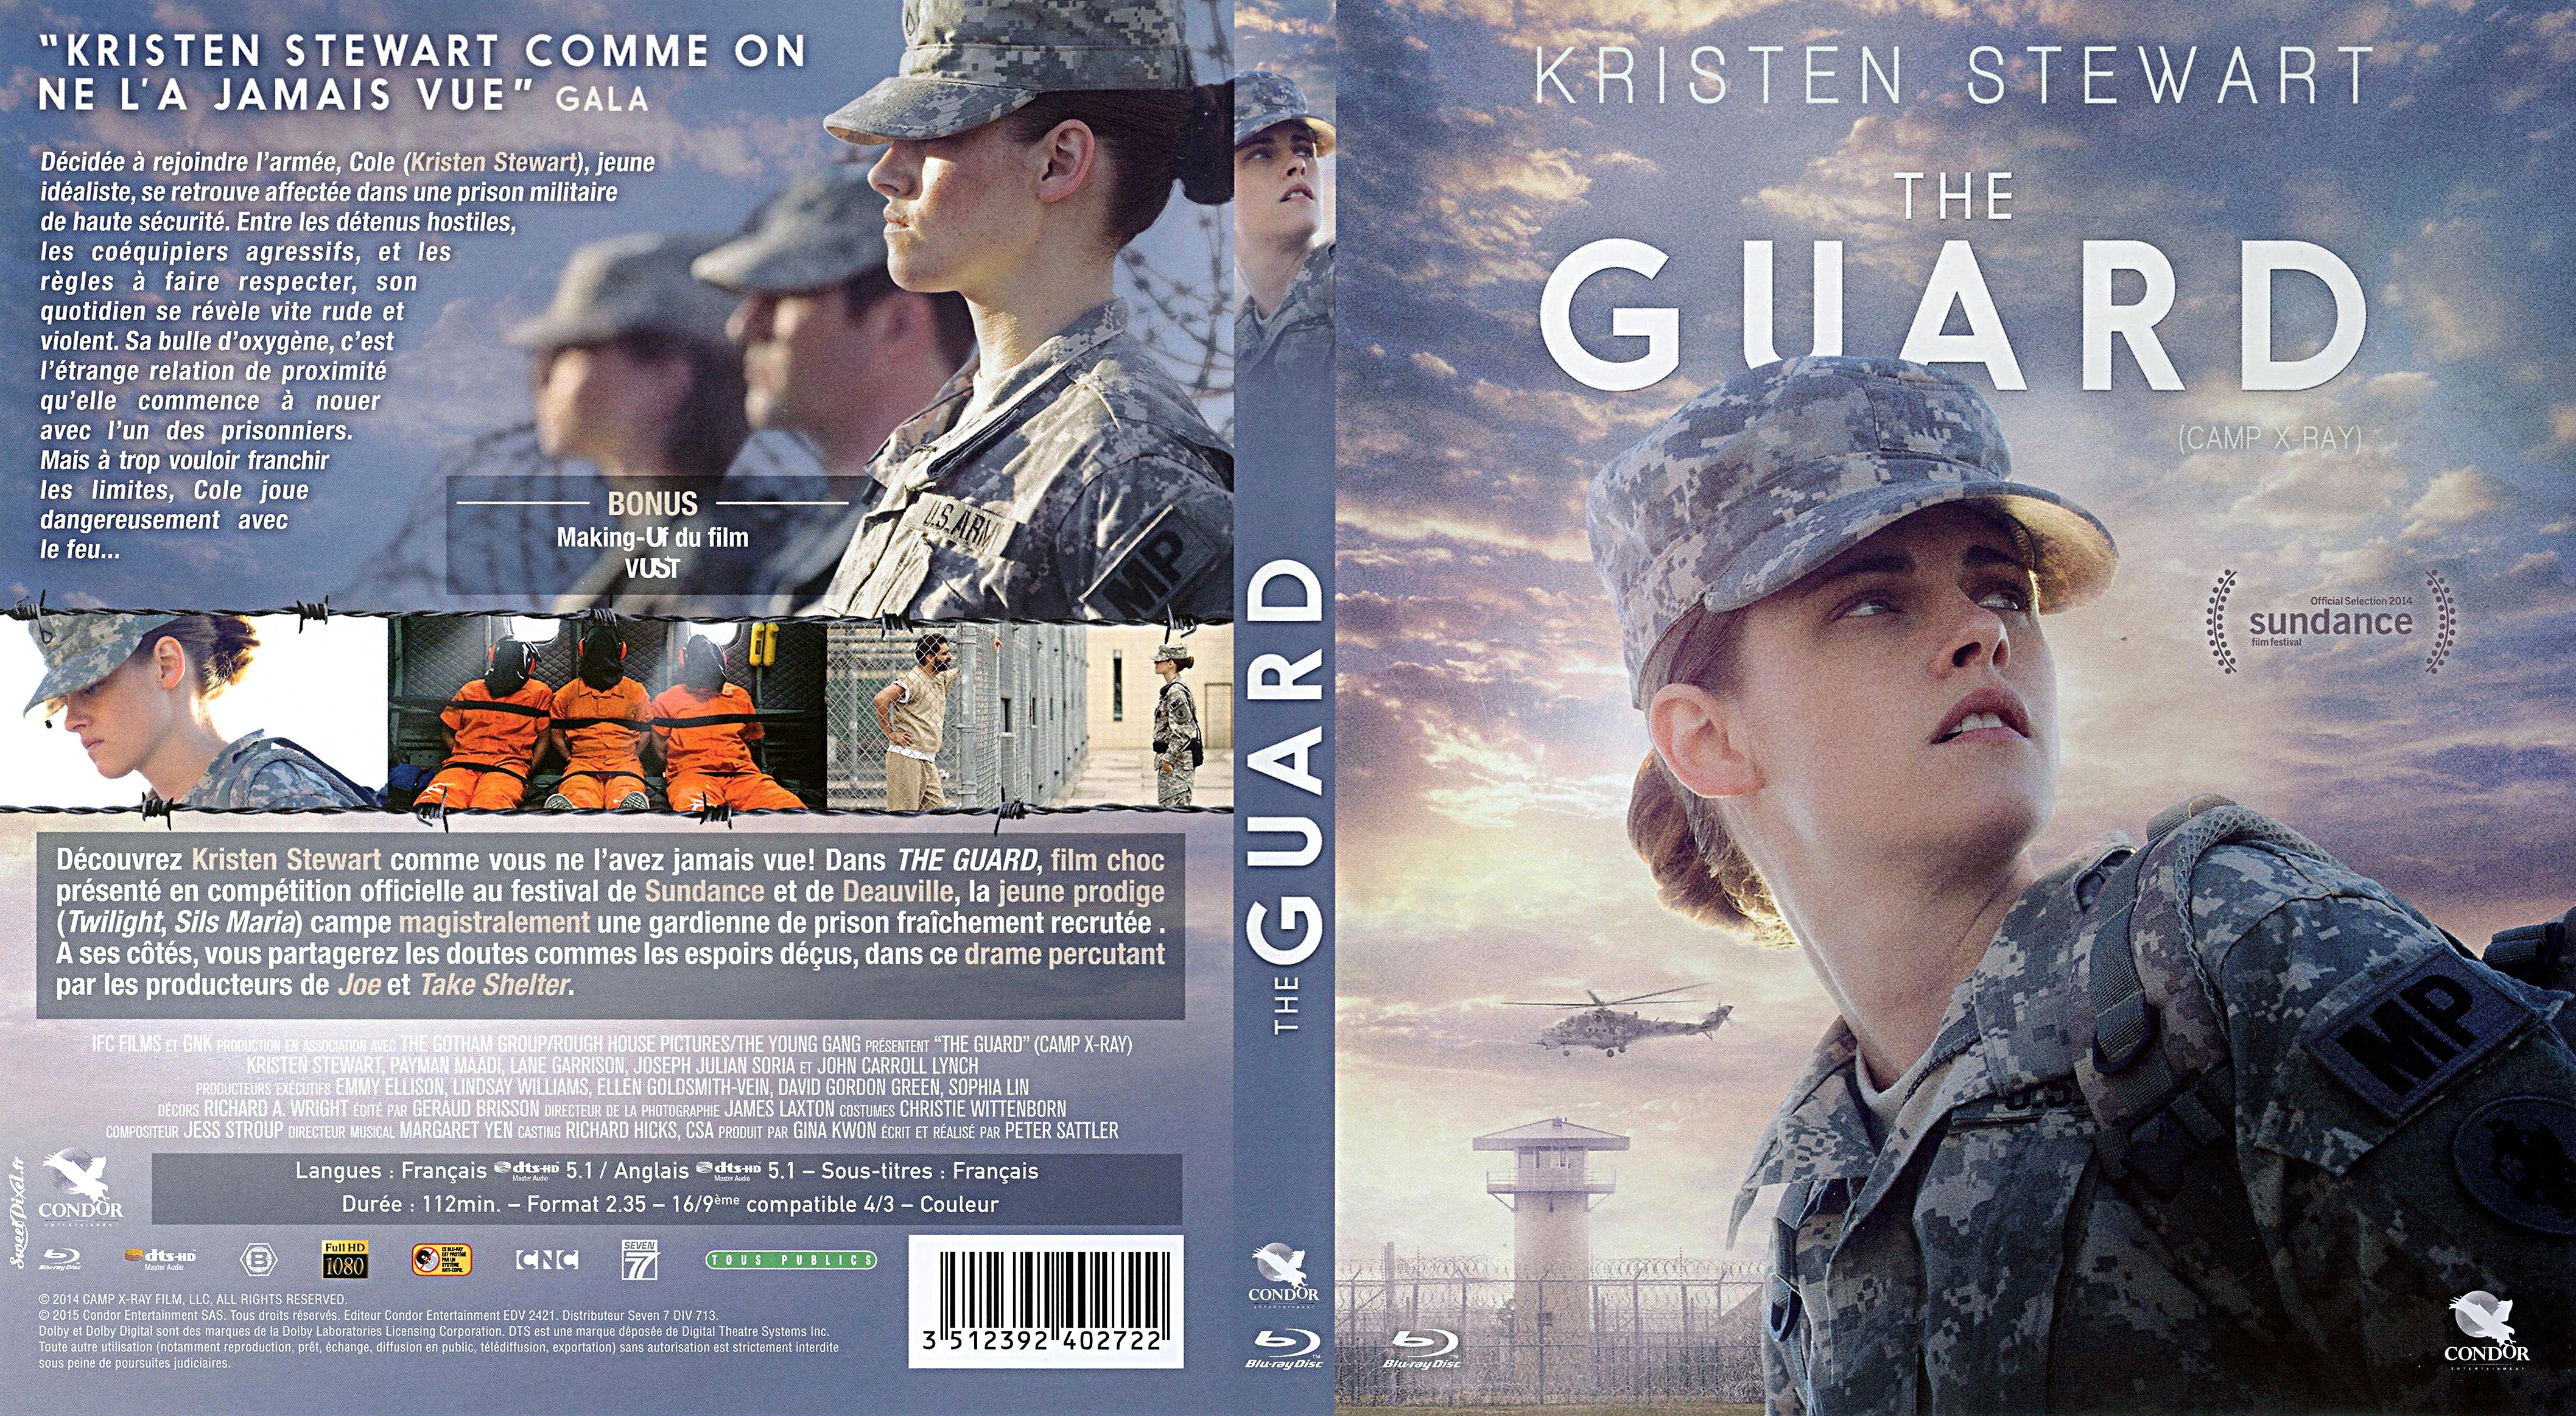 Jaquette DVD The guard (BLU-RAY)